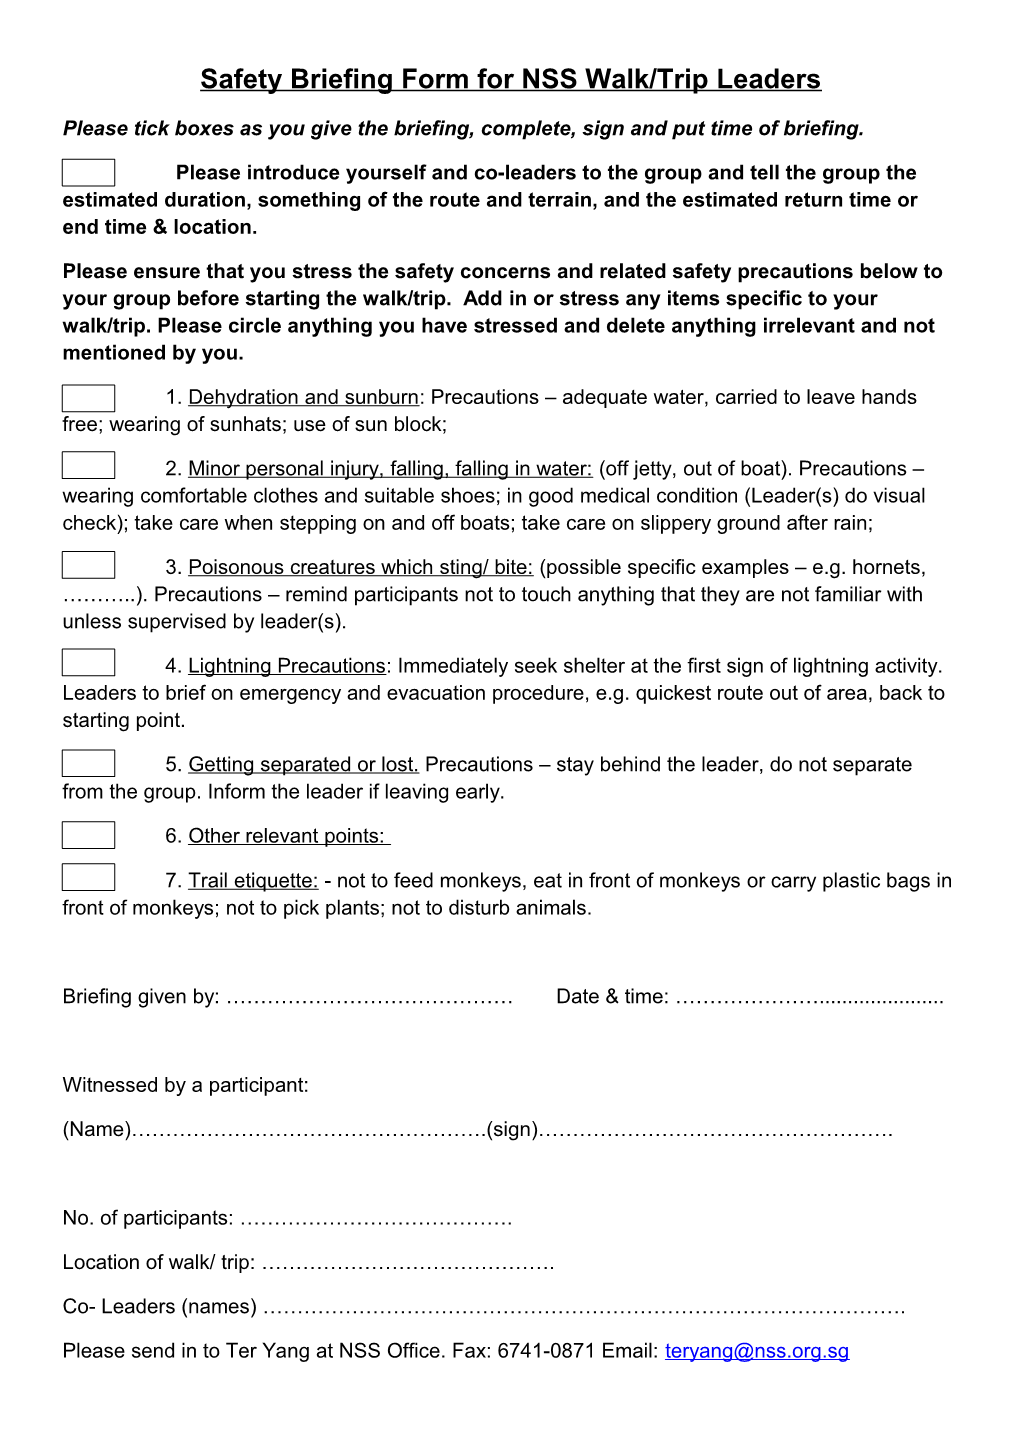 Safety Briefing Form for Guided Walks/ Trips